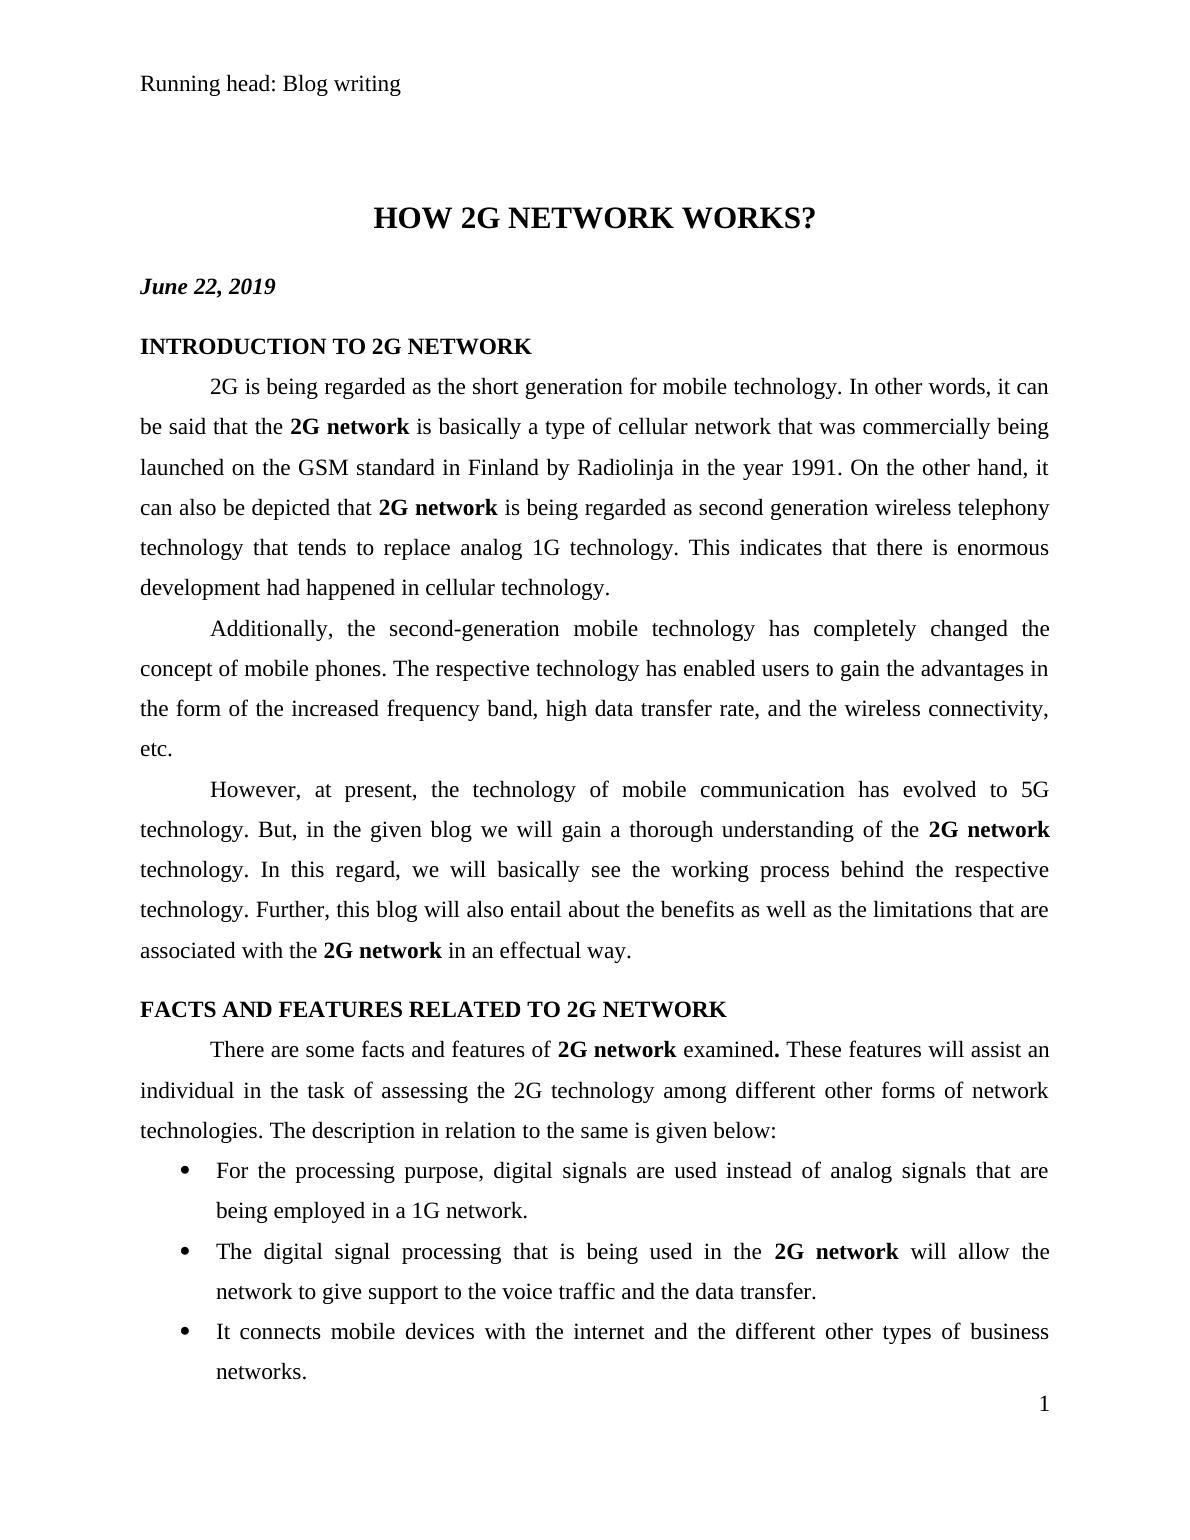 Assignment On How 2G Network Works_2